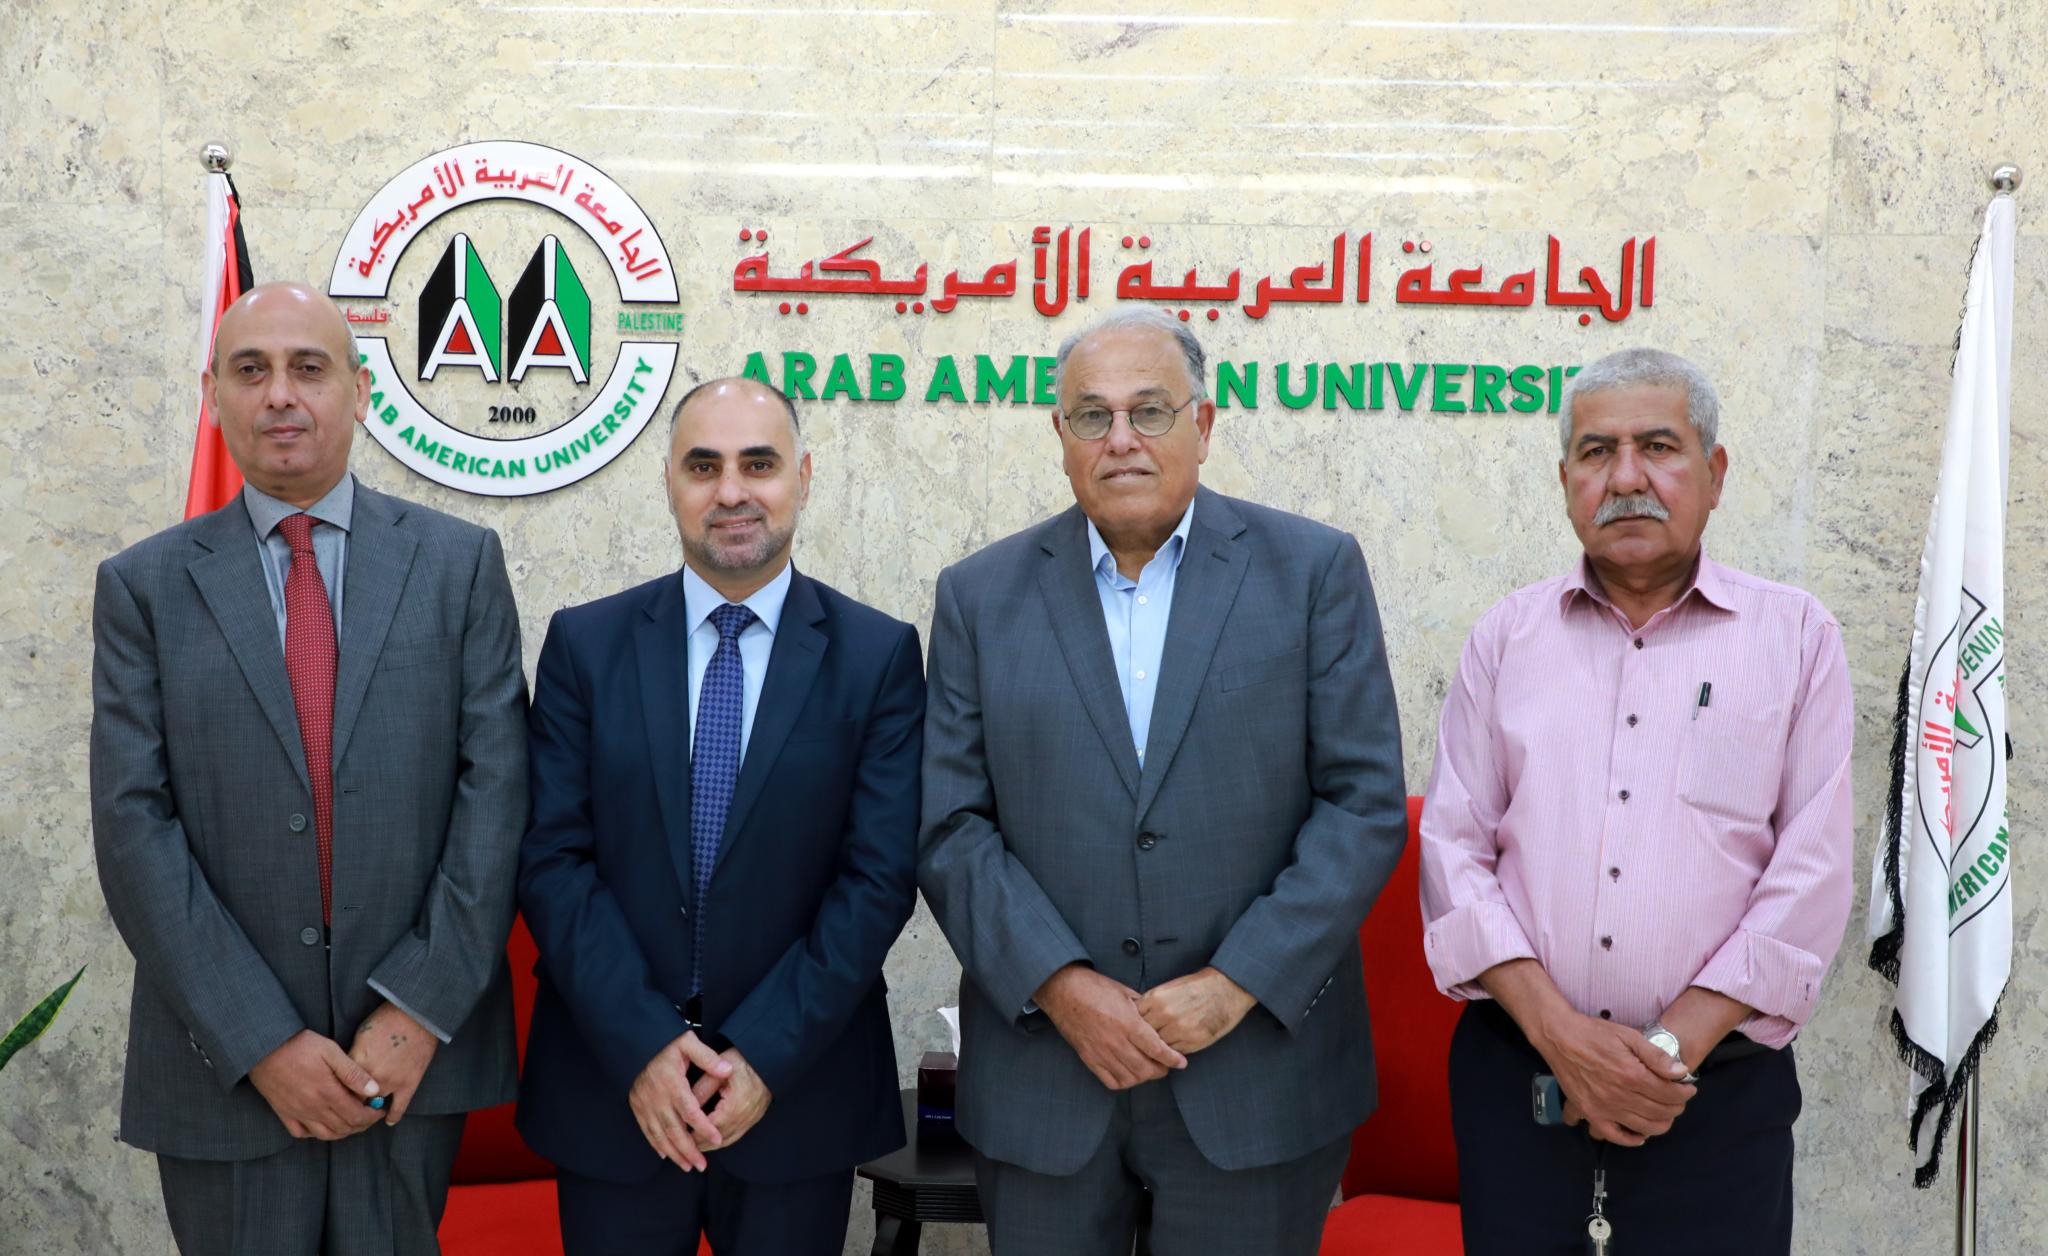 The Undersecretary of the Media Ministry Visits the University